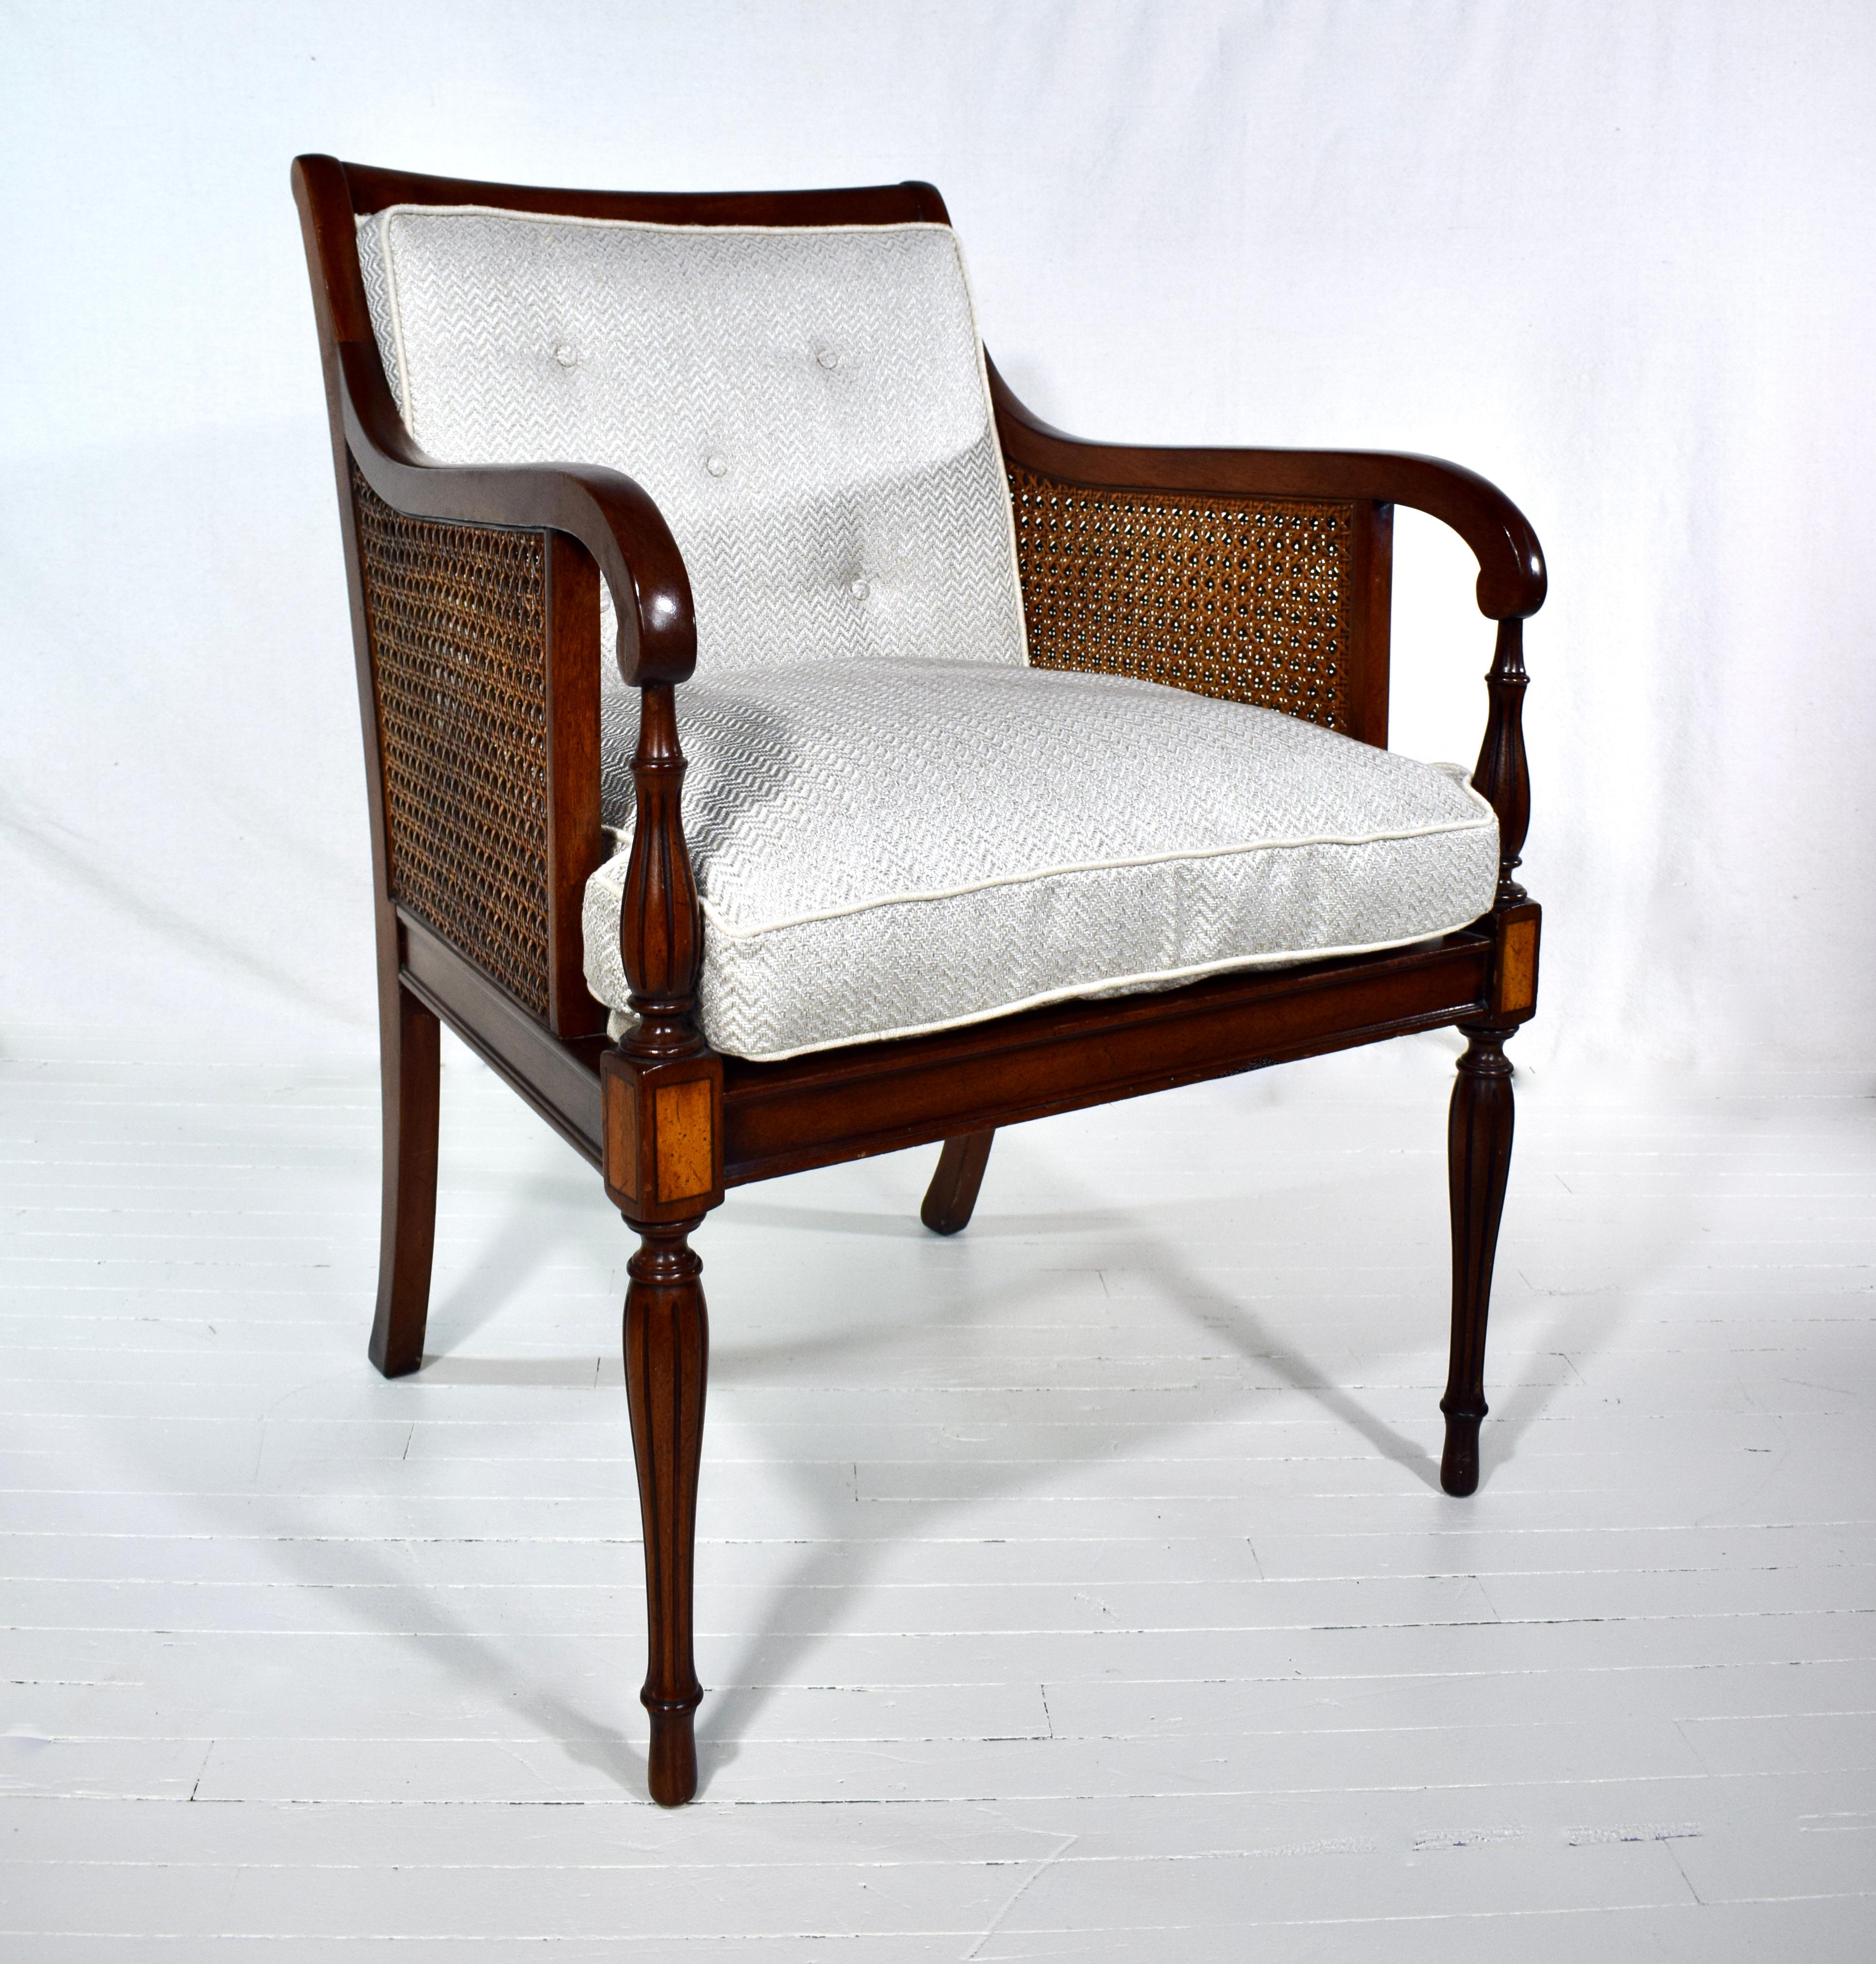 A double caned, George III Regency style mahogany & satinwood armchair with tapered reed & turned legs. The chair is fully hand detailed with beautifully maintained double caning well in tact. New textured Herringbone upholstery includes button